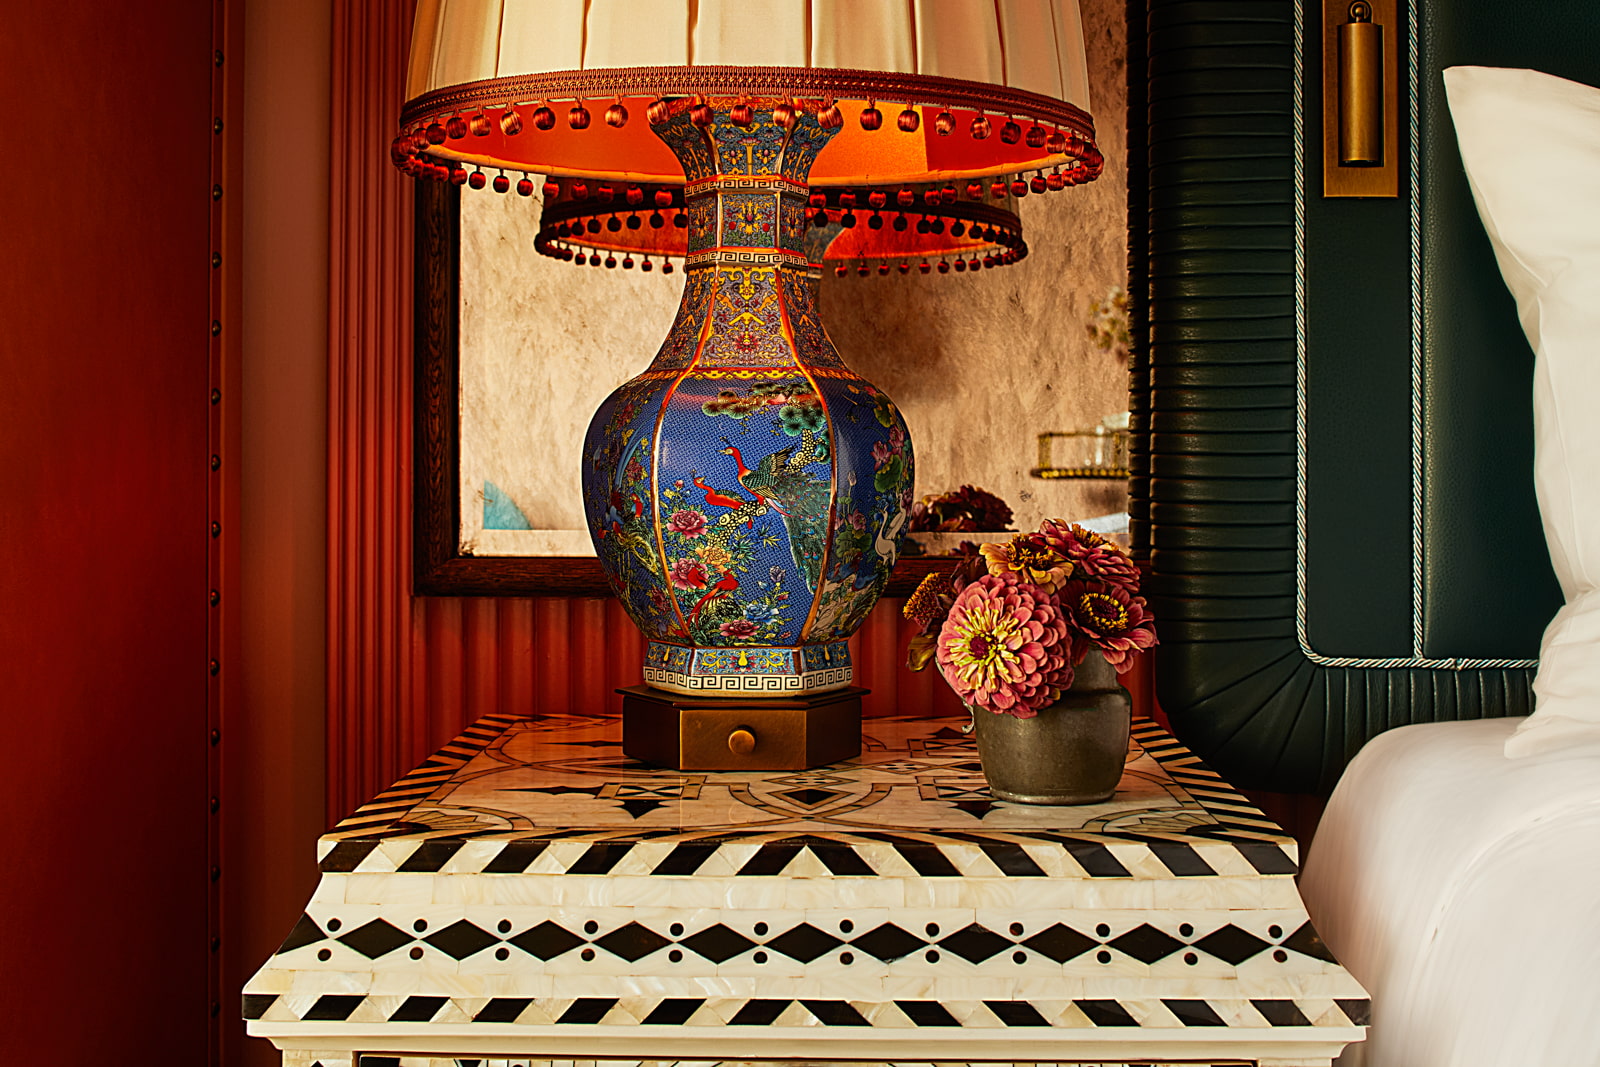 Artisanal night lamp paired with a charming small flower vase on the bedside table.